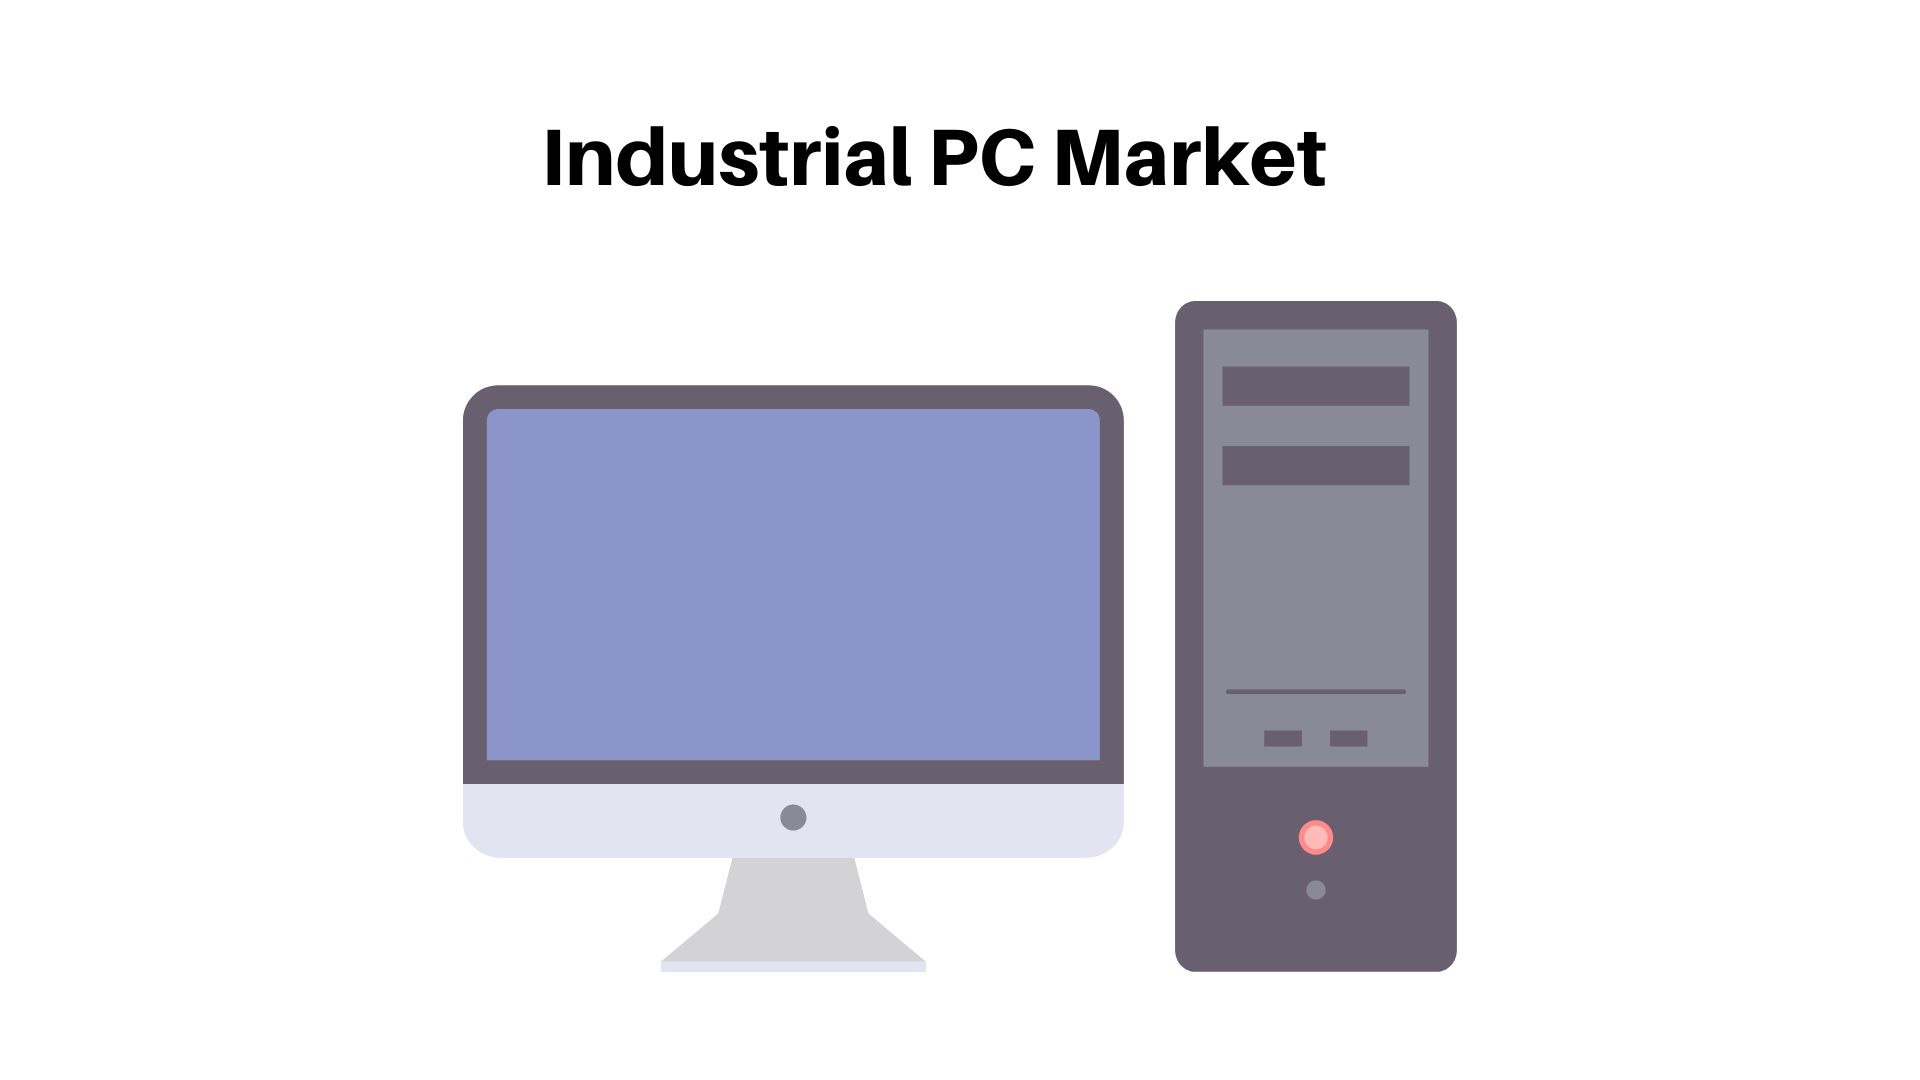 Industrial Pc Market was valued at nearly USD 10.6 Billion by 2032